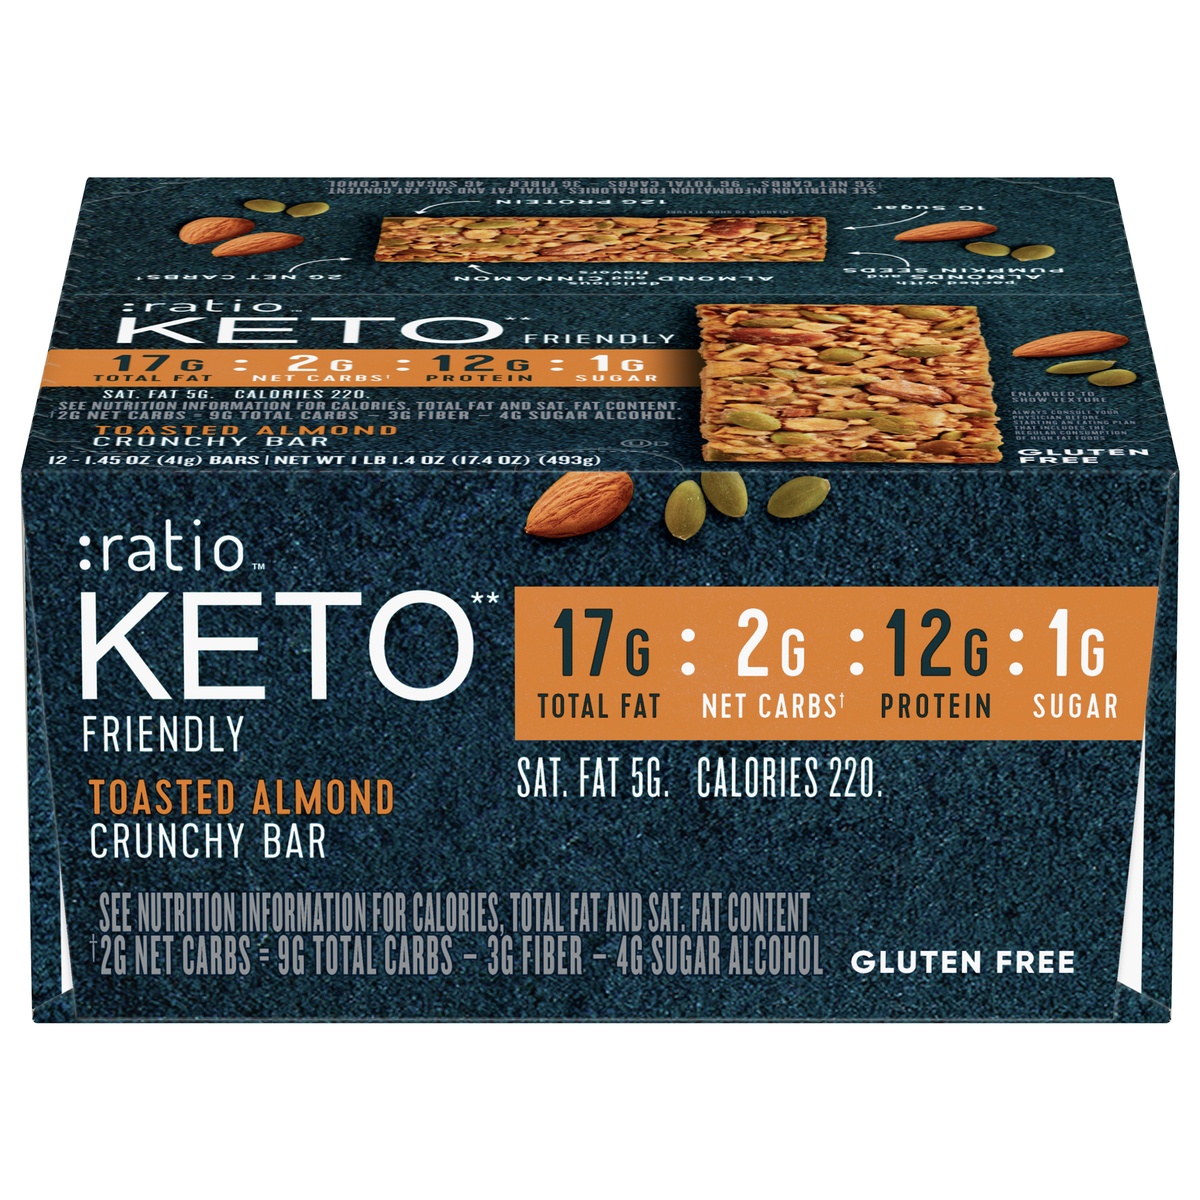 slide 11 of 11, :ratio KETO Friendly Crunchy Bars, Toasted Almond, Gluten Free Snack, 12 ct, 17.4 oz